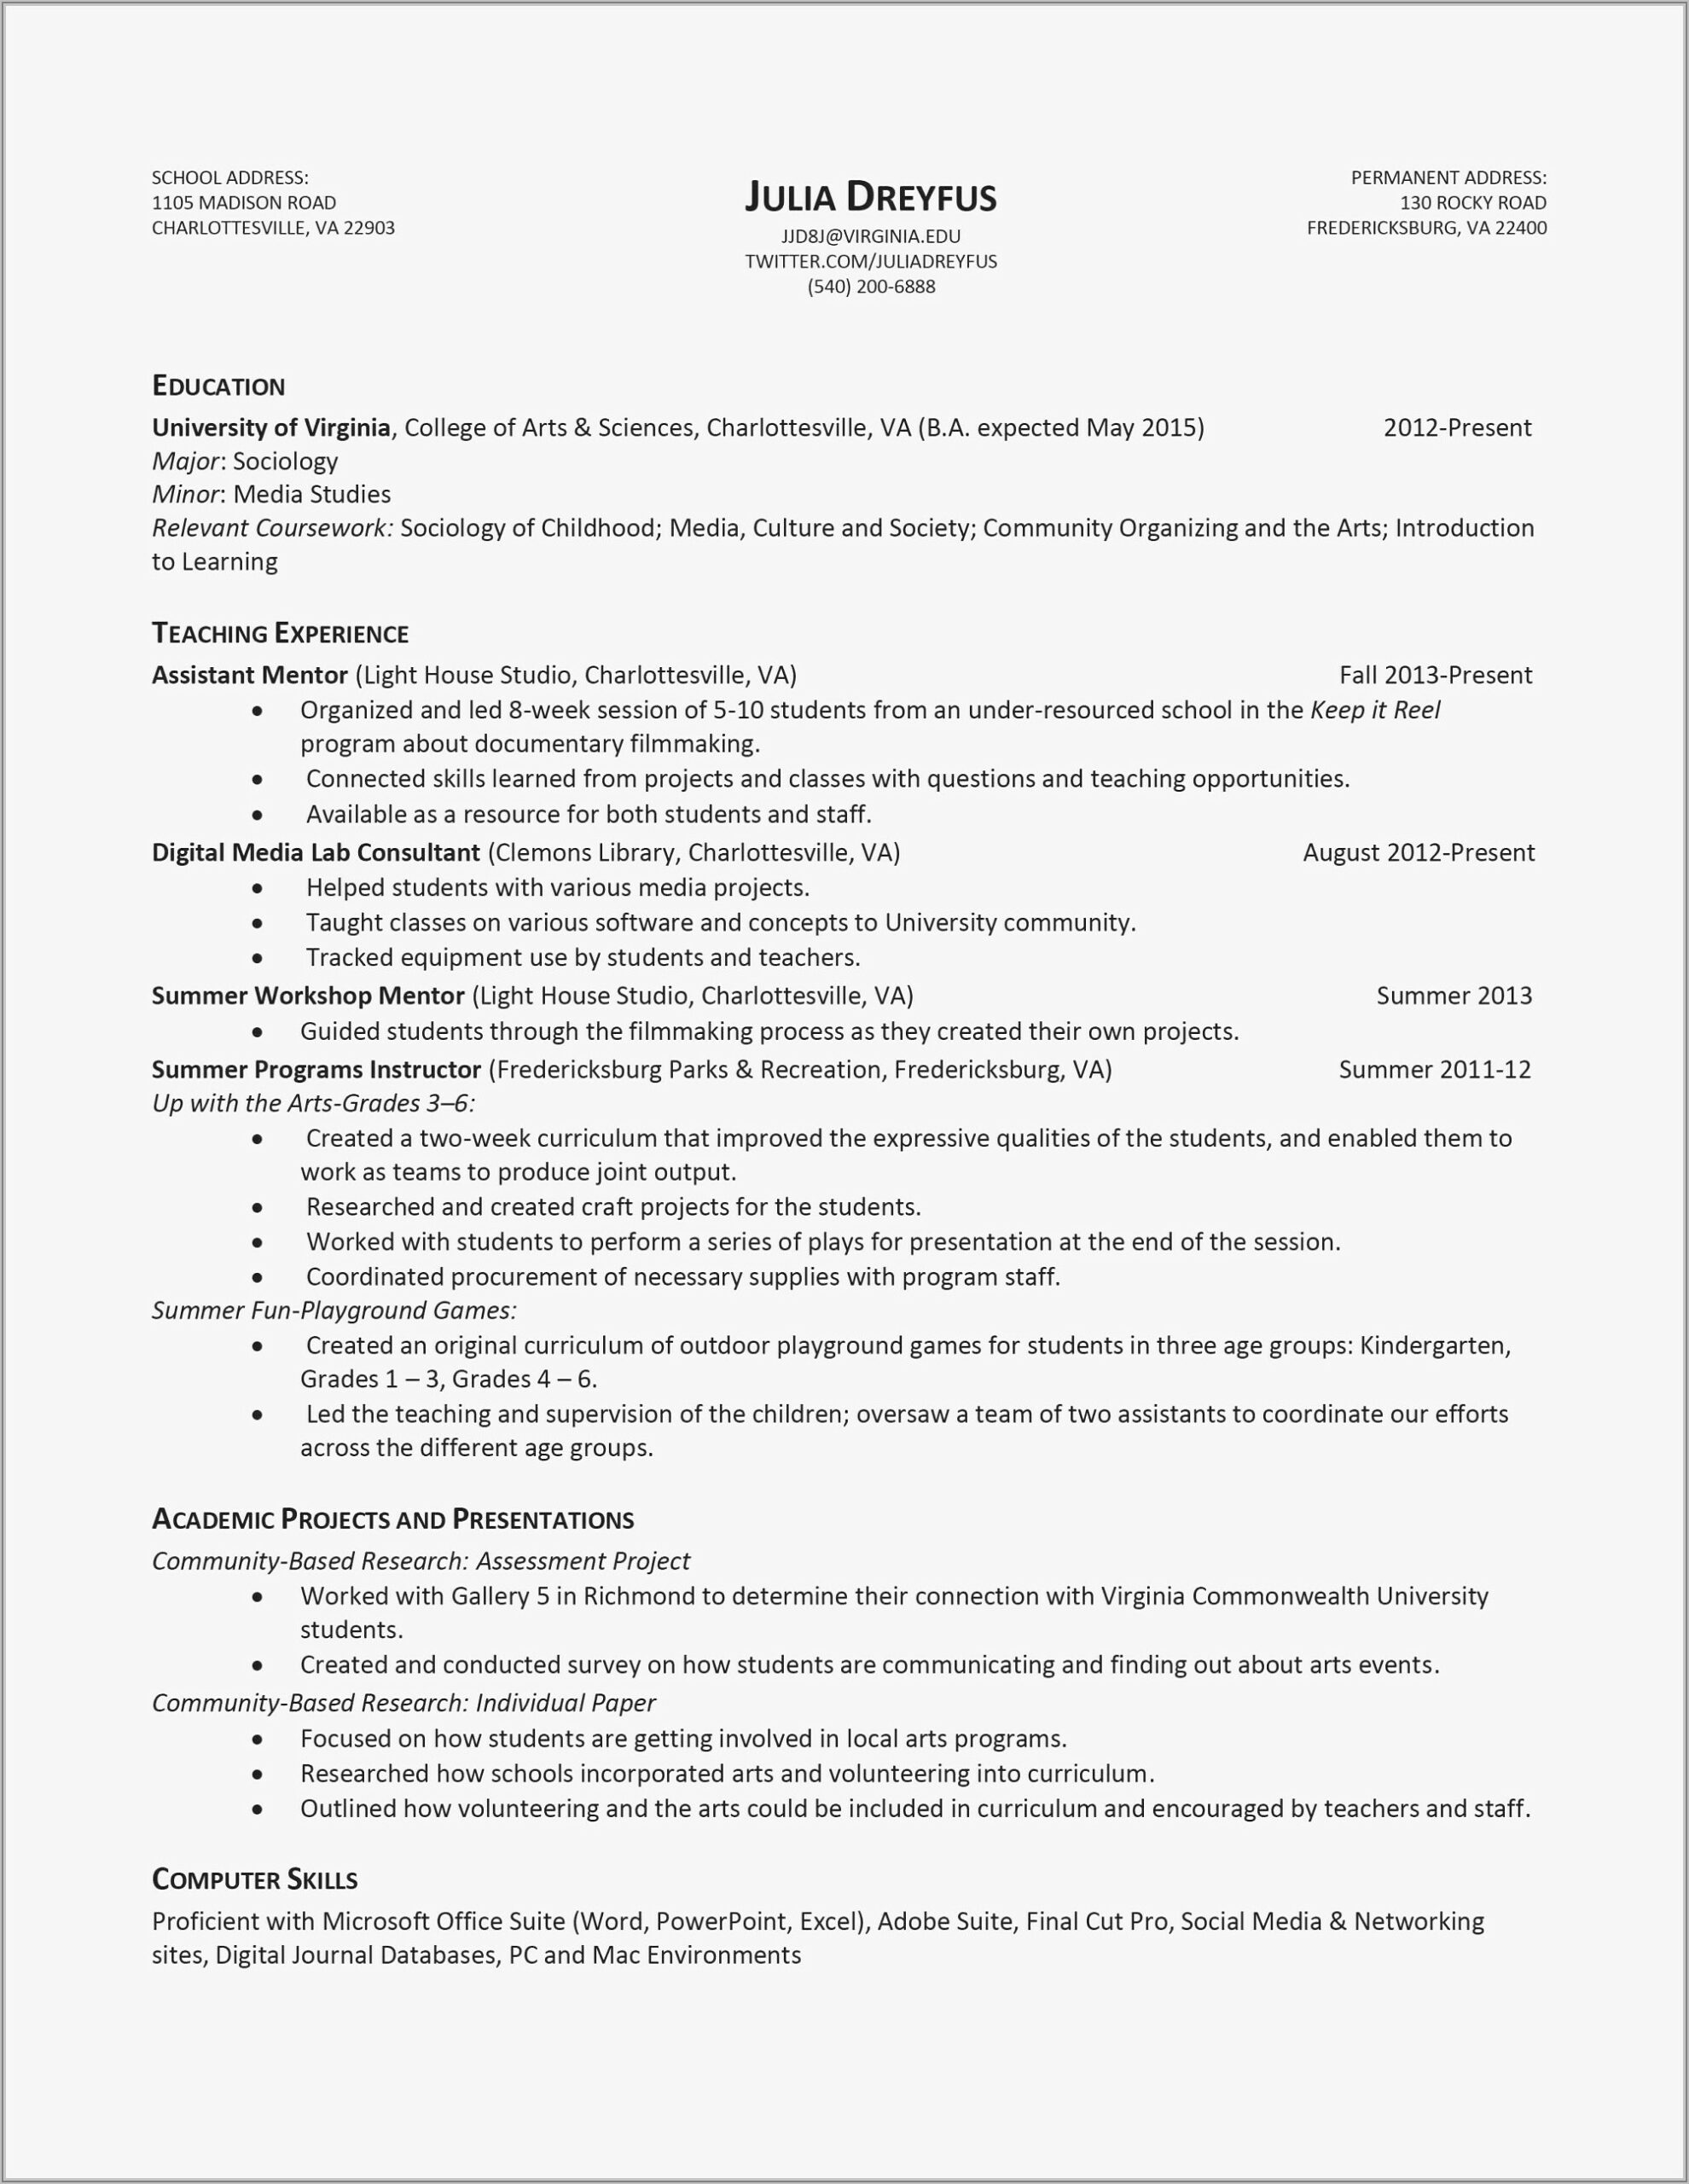 Best Executive Chef Resume Samples